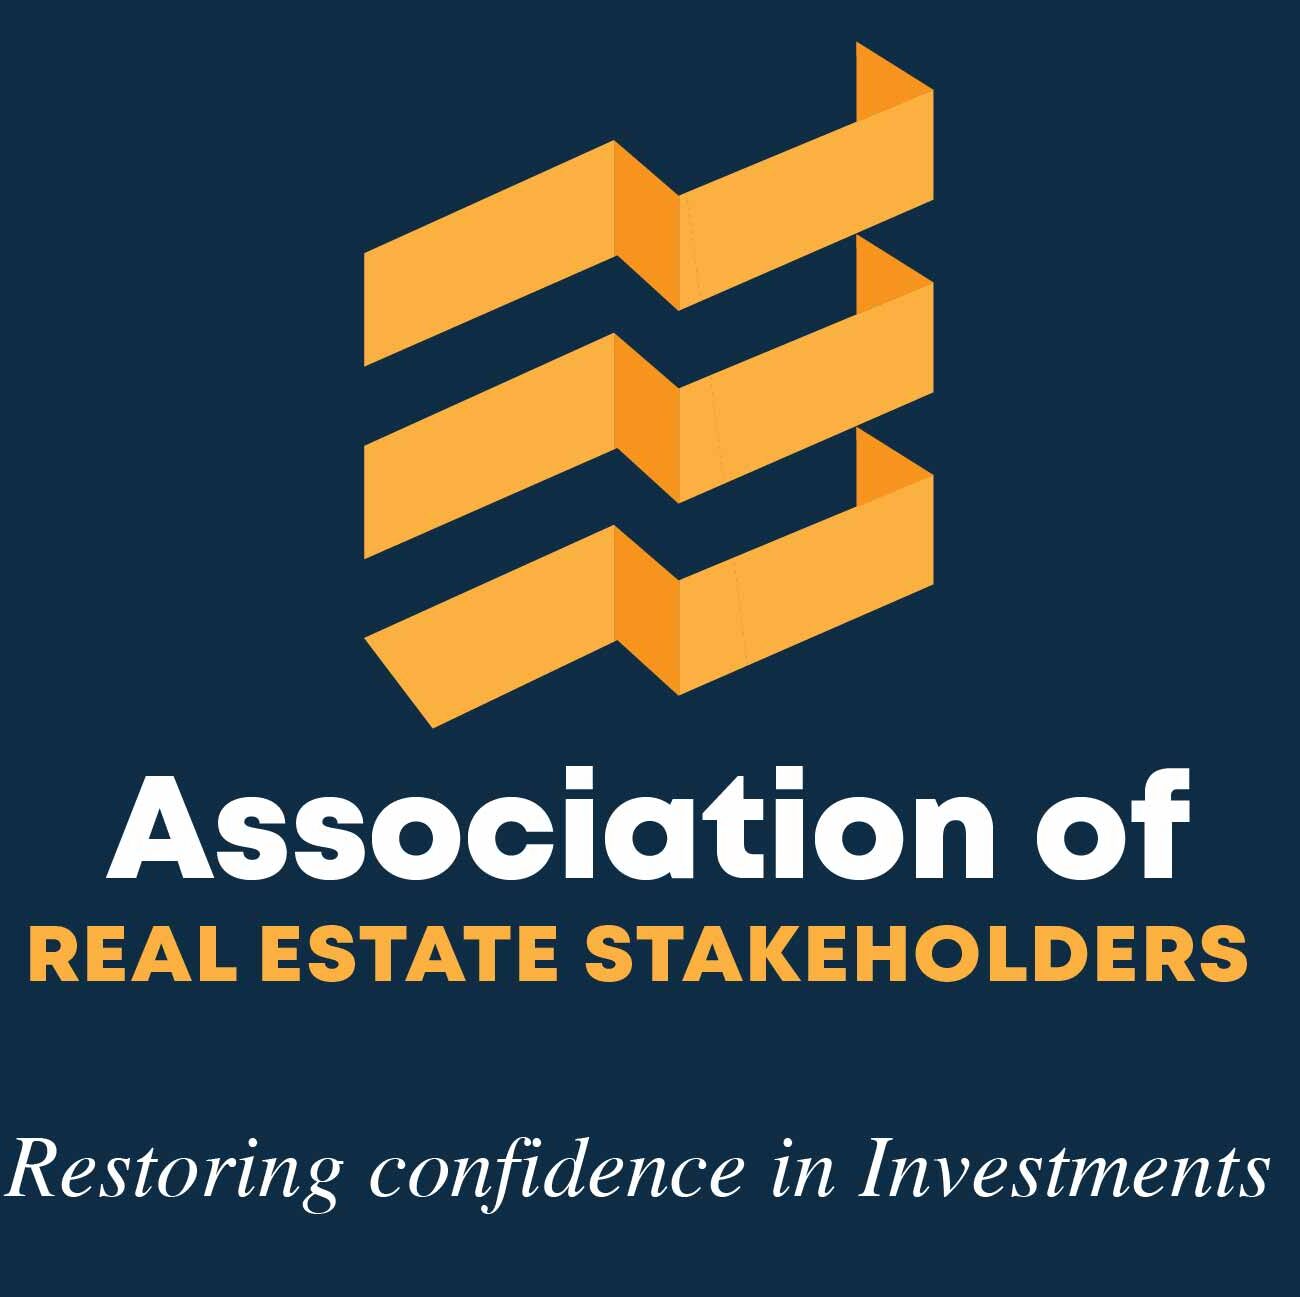 ASSOCIATION OF REAL ESTATE STAKEHOLDERS